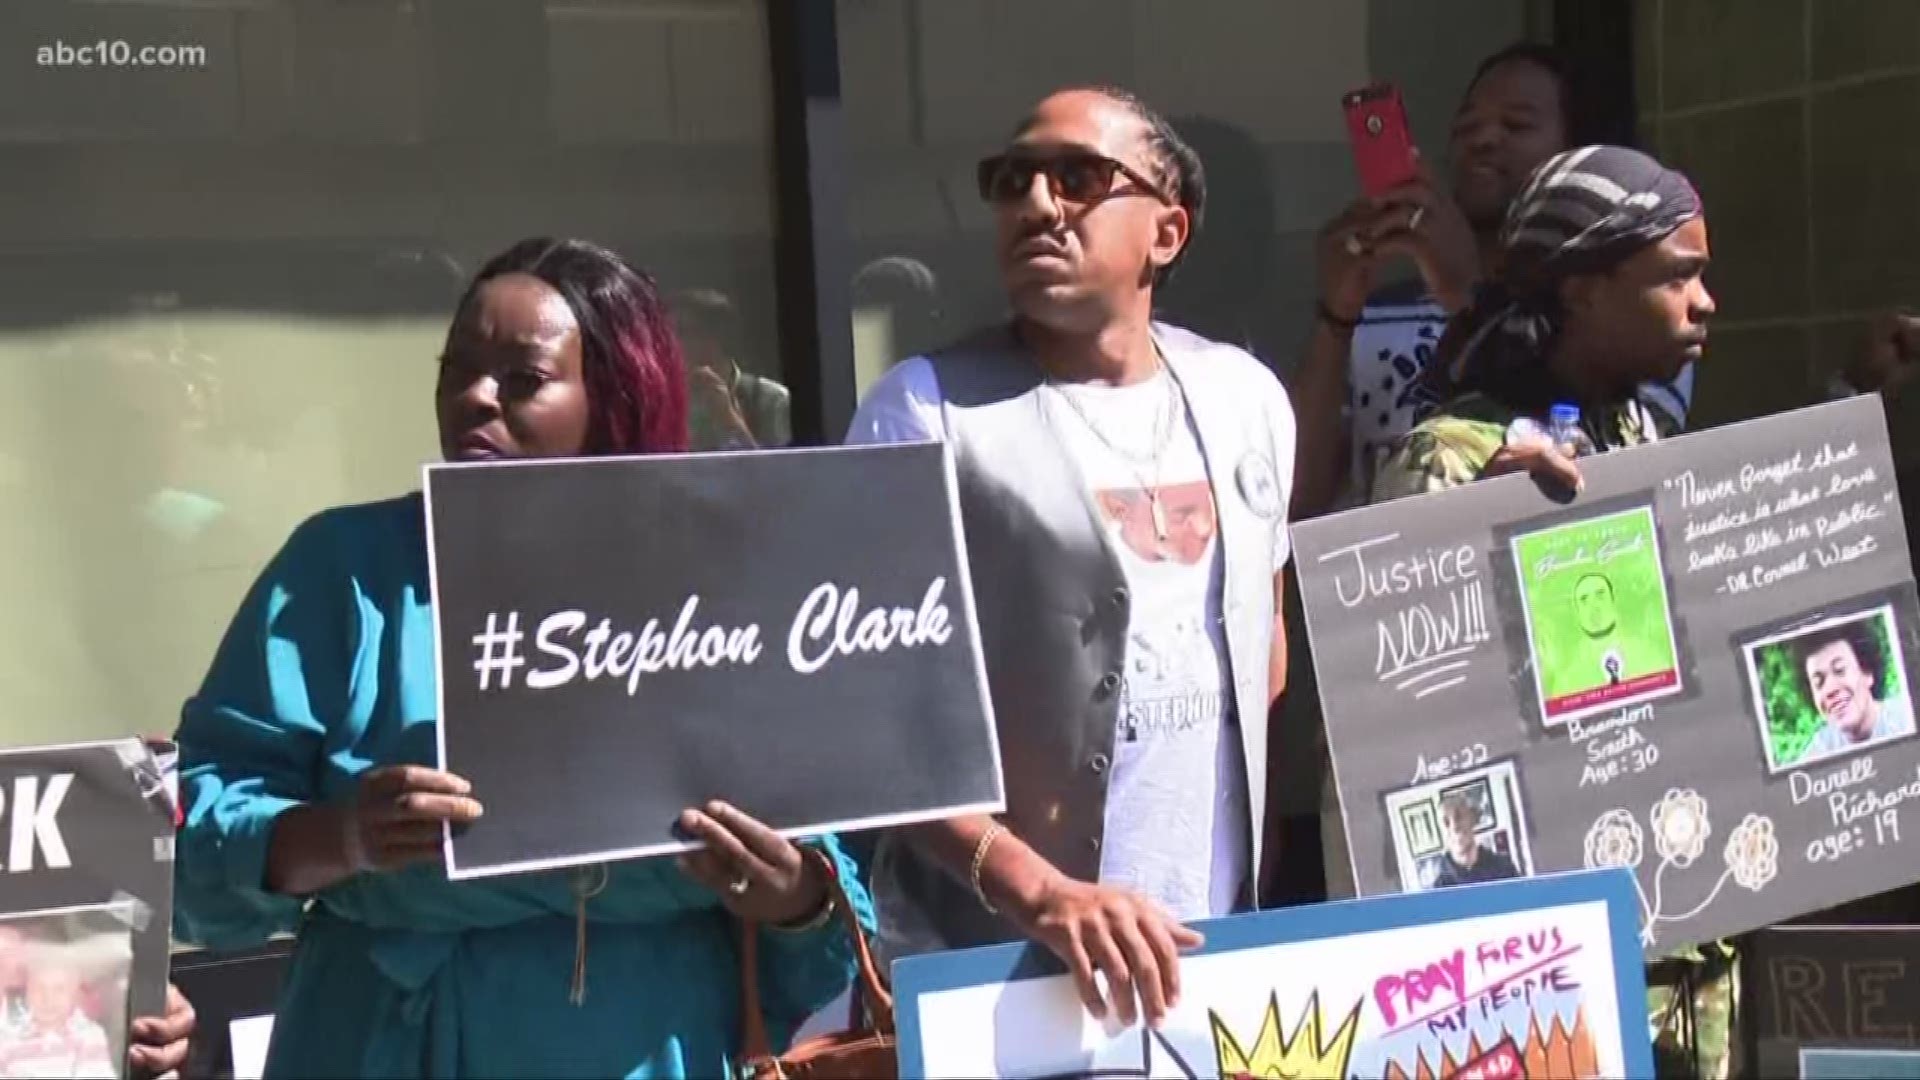 The protest, which marked six months since Stephon Clark was shot and killed in his backyard by Sacramento Police officers, was in opposition to a three-day statewide law enforcement conference at the convention center.